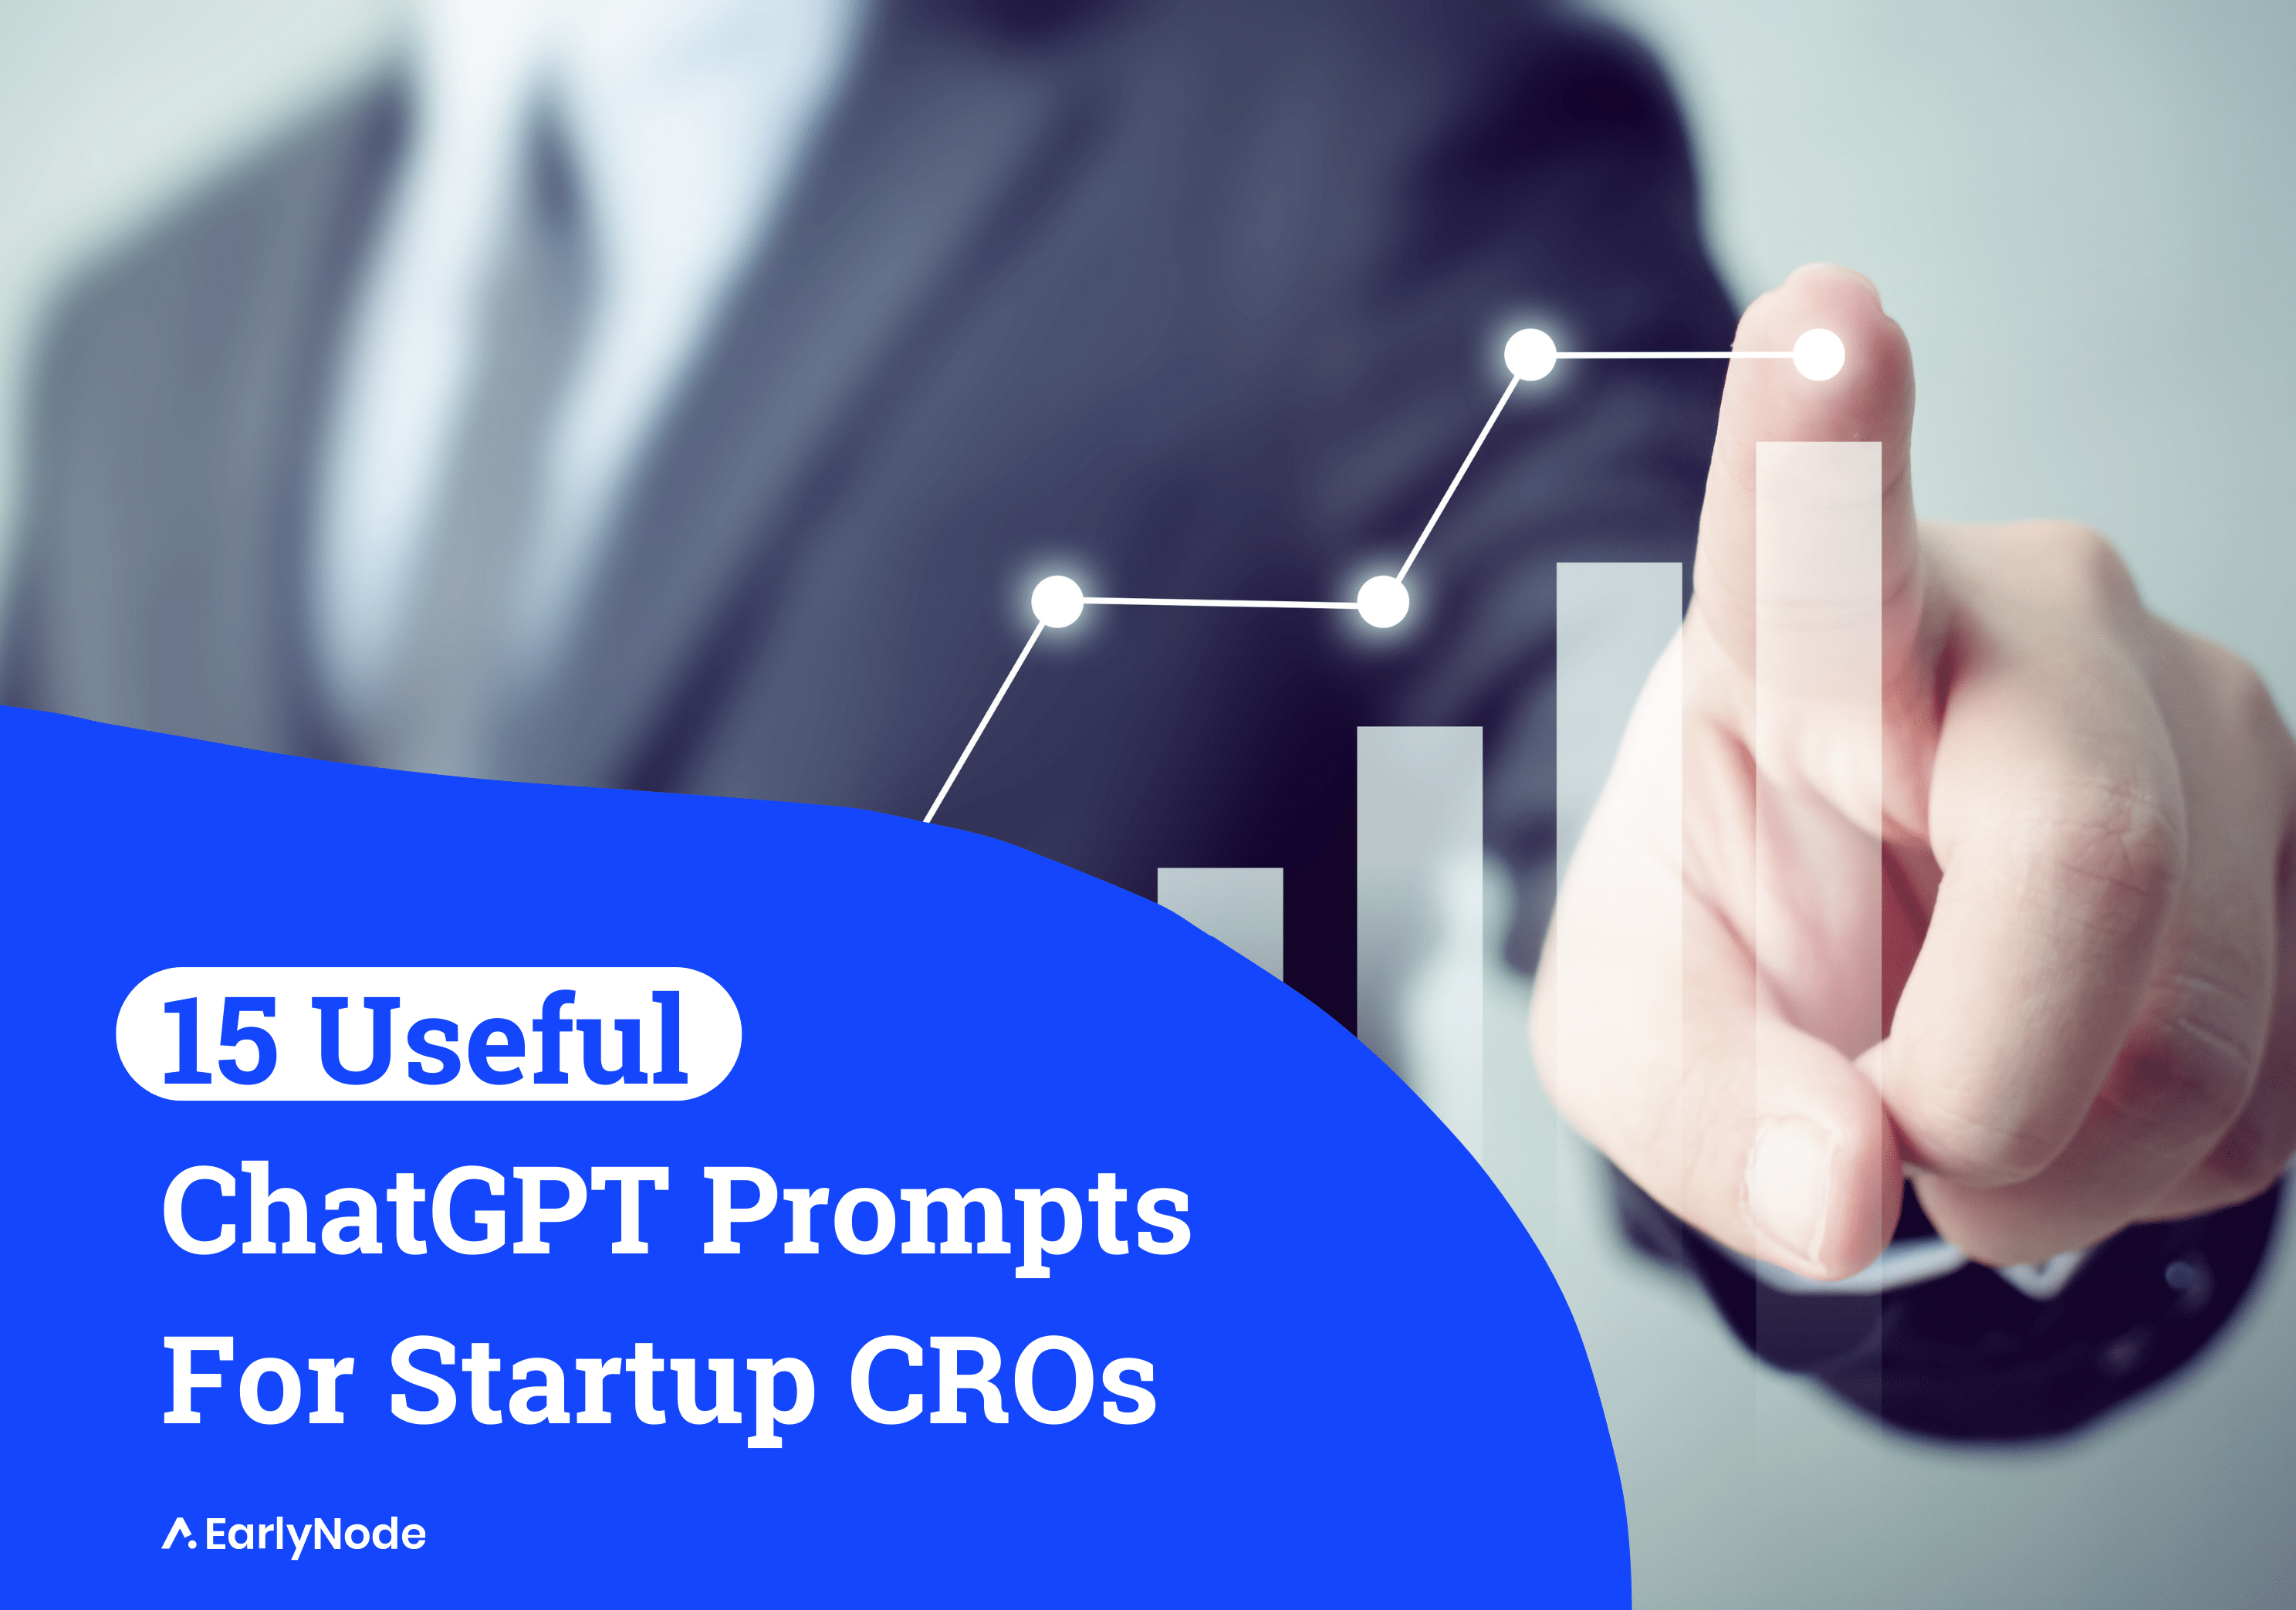 15 Useful ChatGPT Prompts For Startup CROs